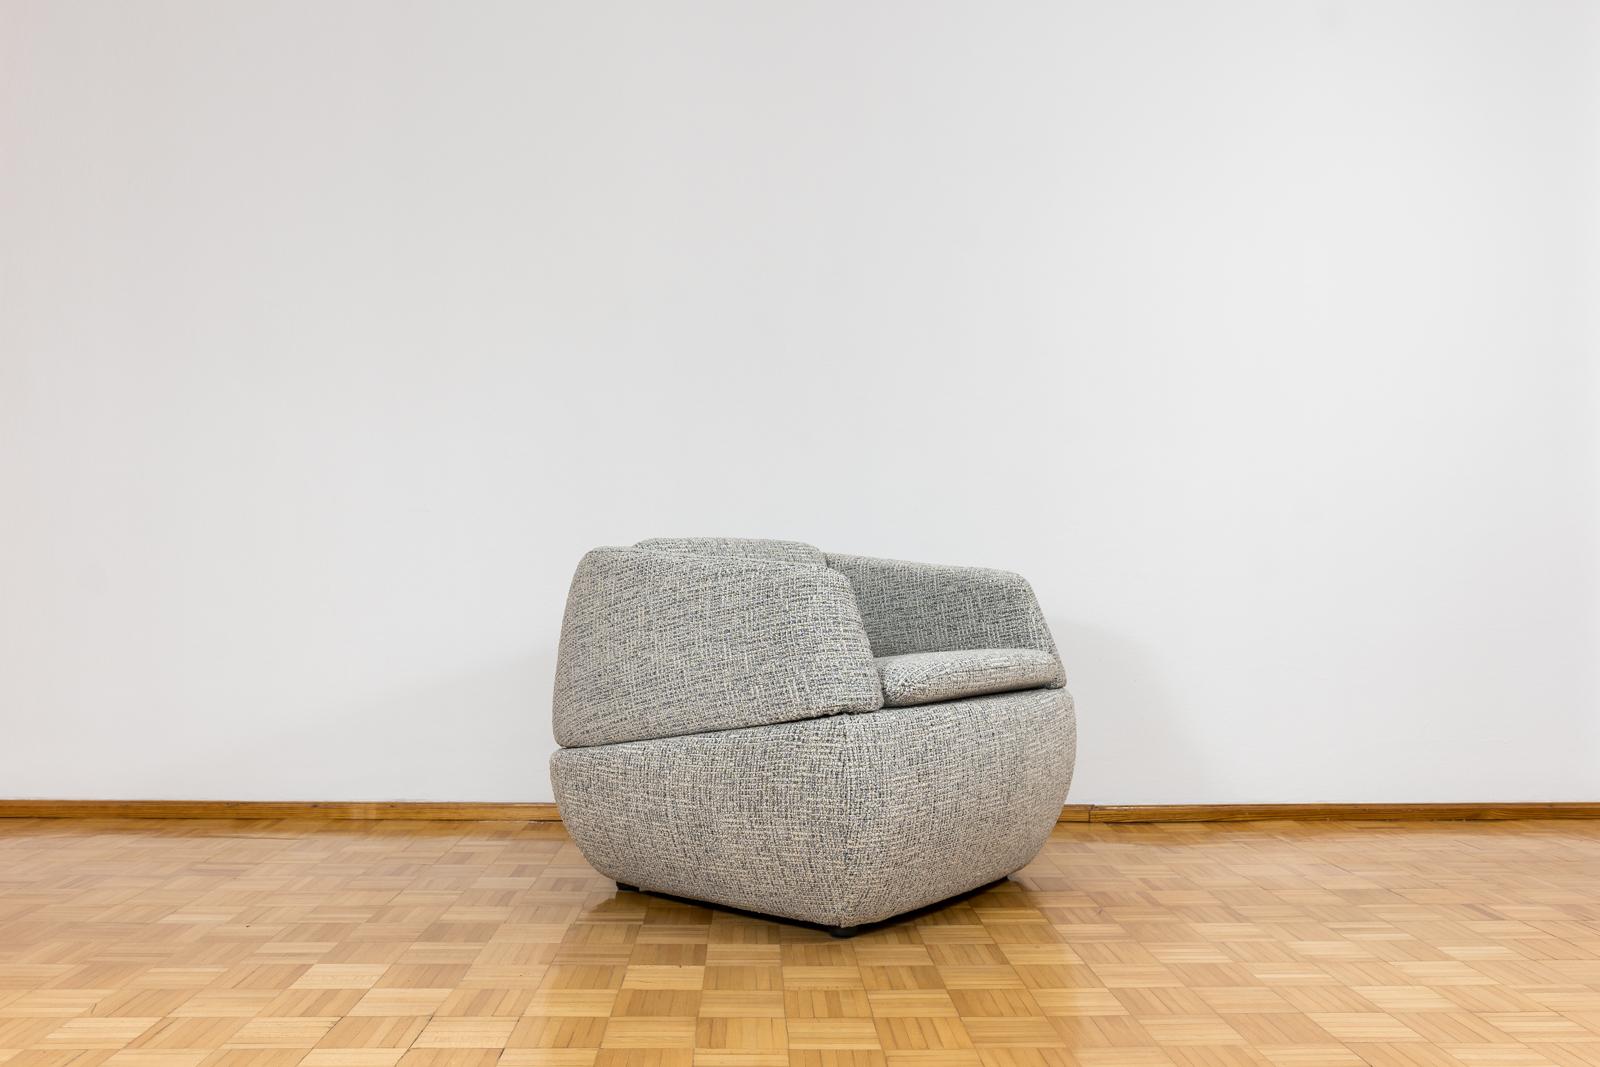 Polish Customizable Space Age Lounge Chair From Lubuskie Fabryki Mebli, 1970s For Sale